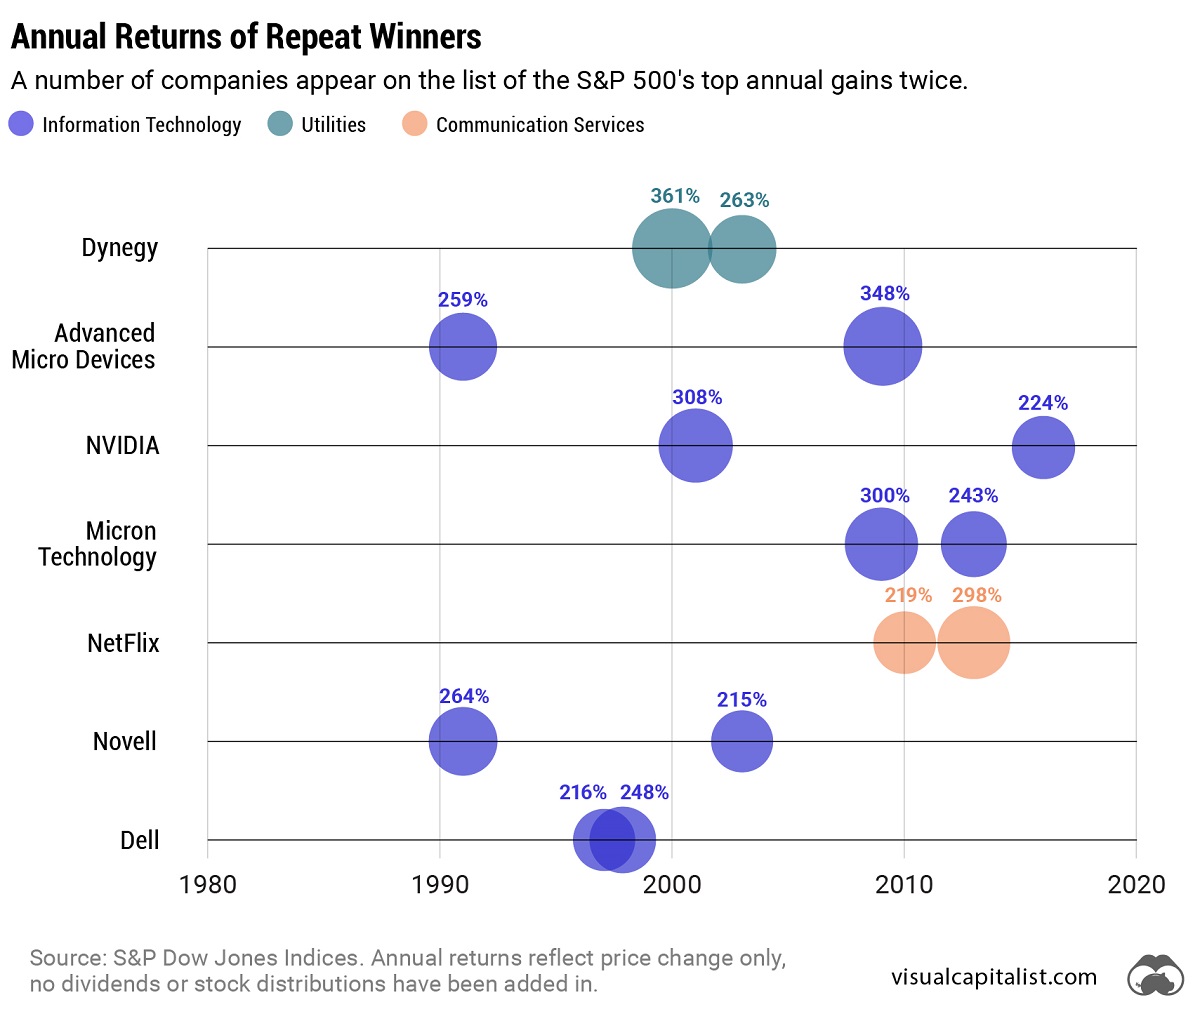 Stocks that have appeared on the list of the top S&P 500 annual gains more than once, organized on a timeline with bubbles sized by the return amount. Dell made the list back to back in 1997 and 1998.